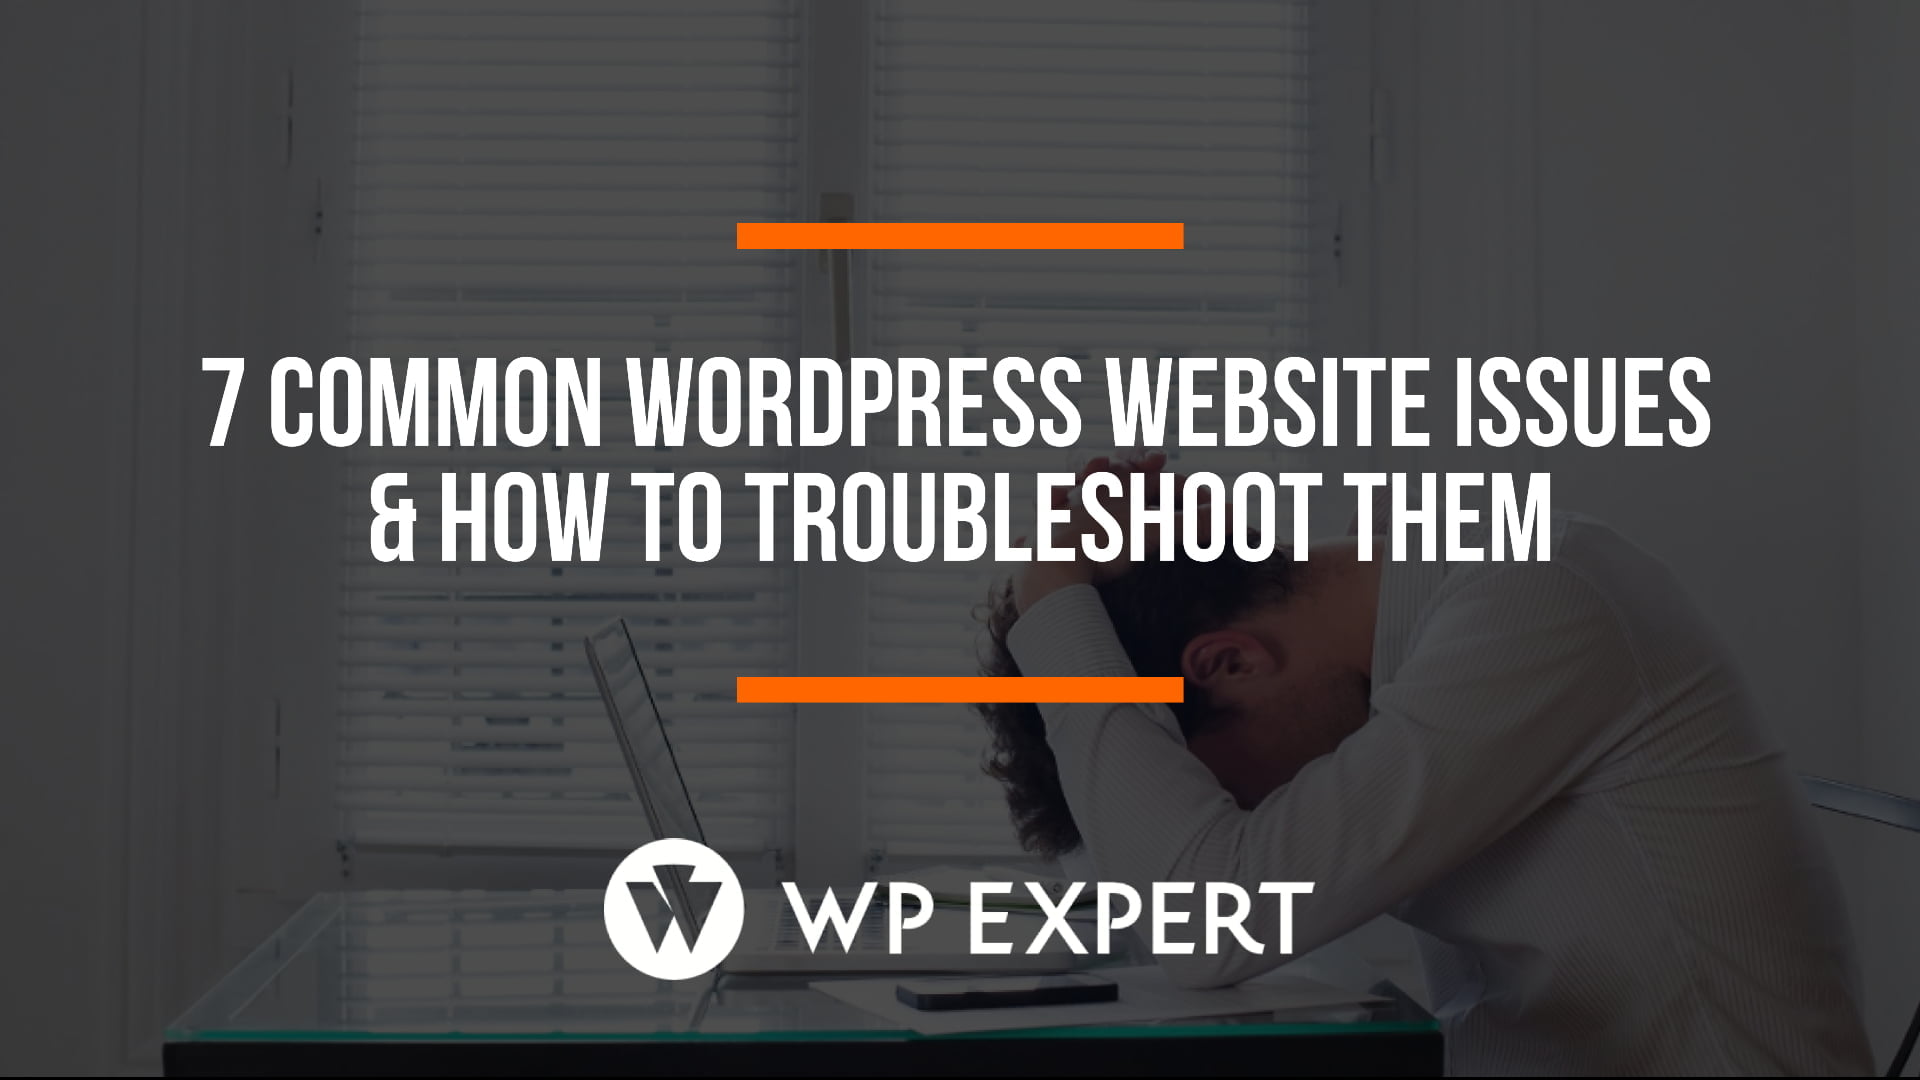 7 Common Wordpress Website Issues & How to Troubleshoot Them